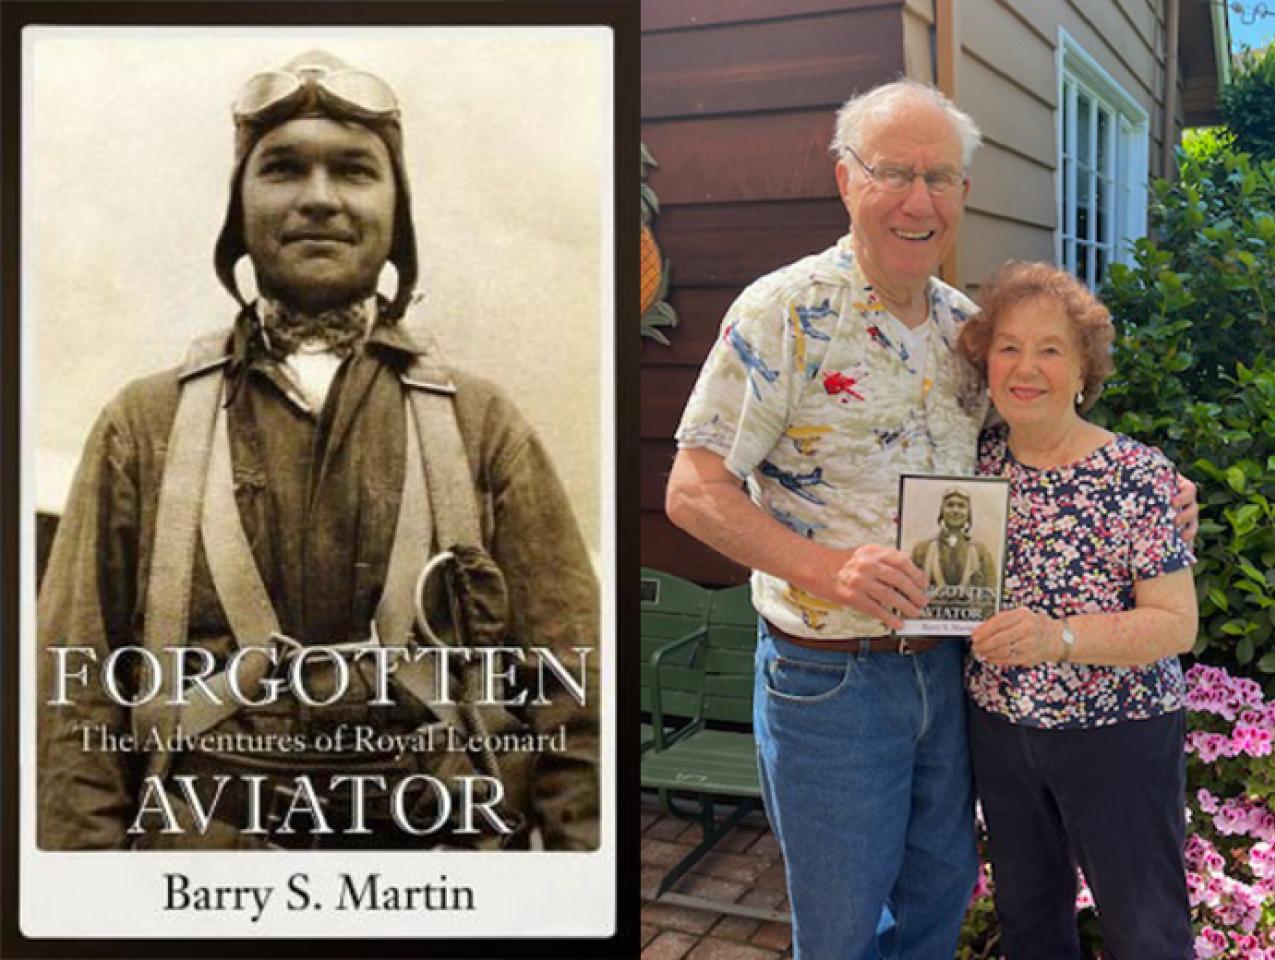 Cover of book "Forgotten Aviator" and authors Barry and Carolyn Martin